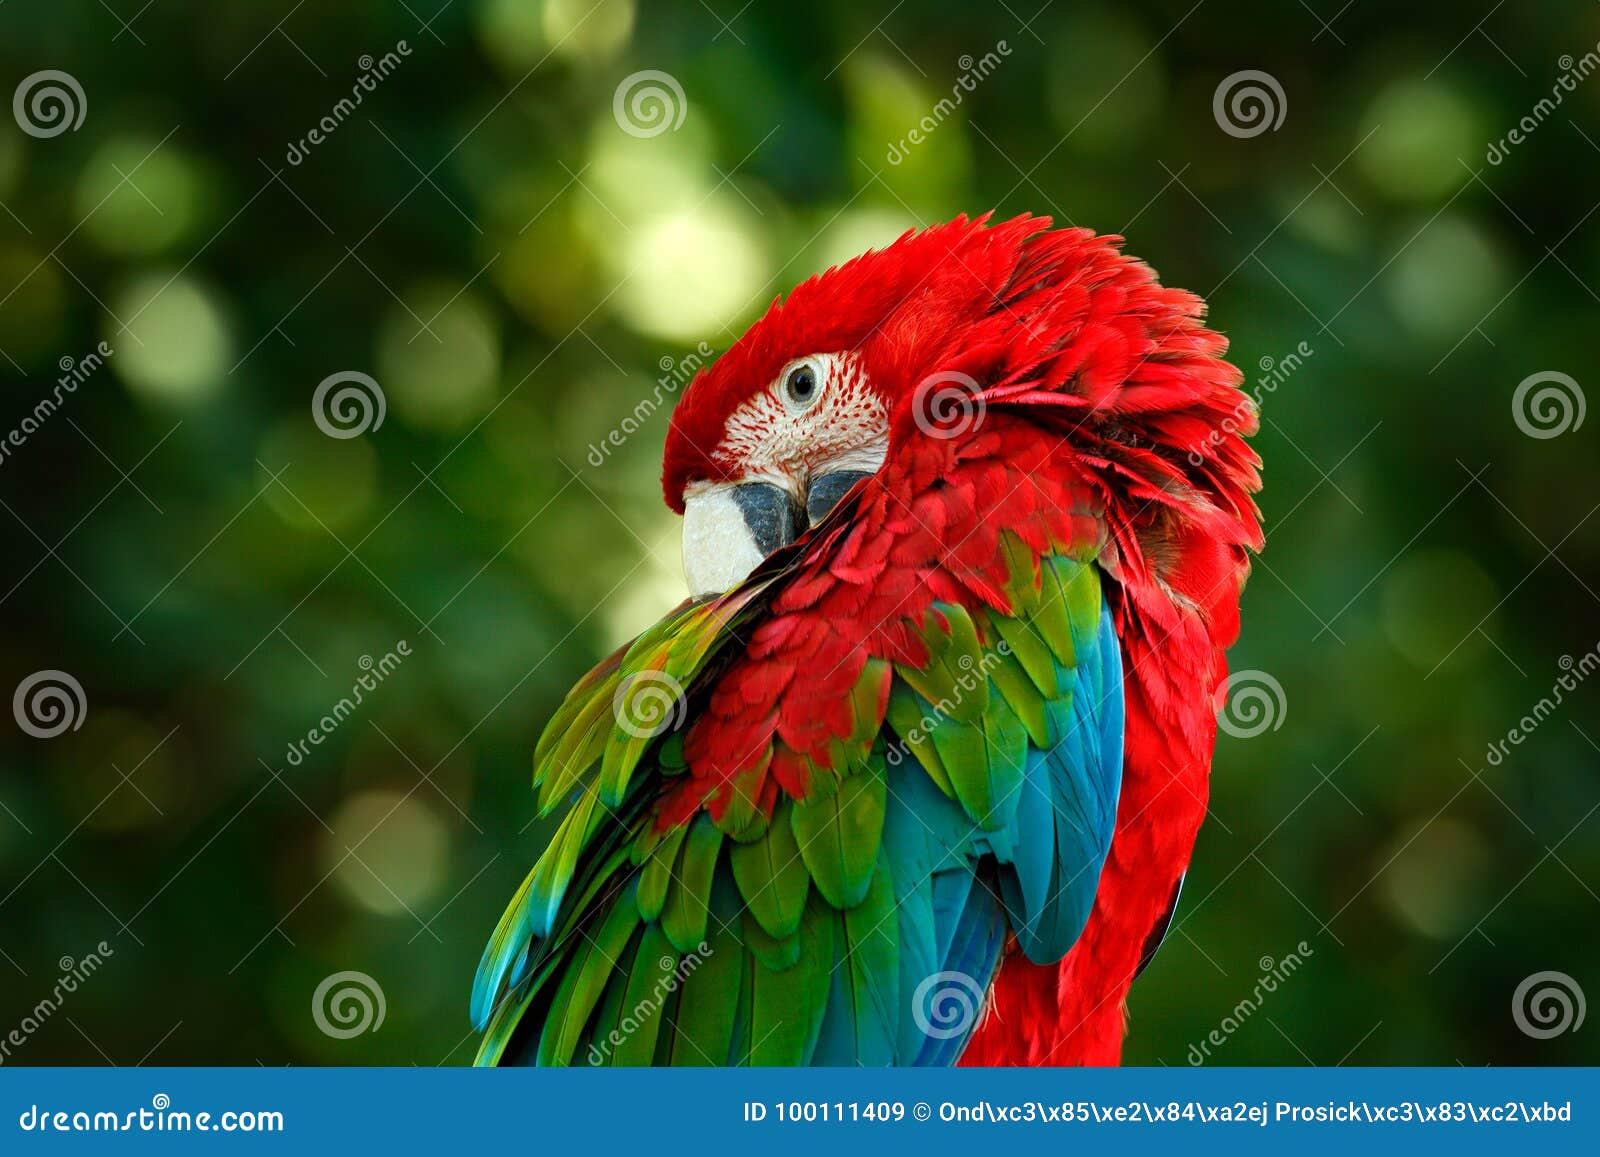 big red parrot red-and-green macaw, ara chloroptera, sitting on the branch with head down, brazil. wildlife scene in nature. beaut